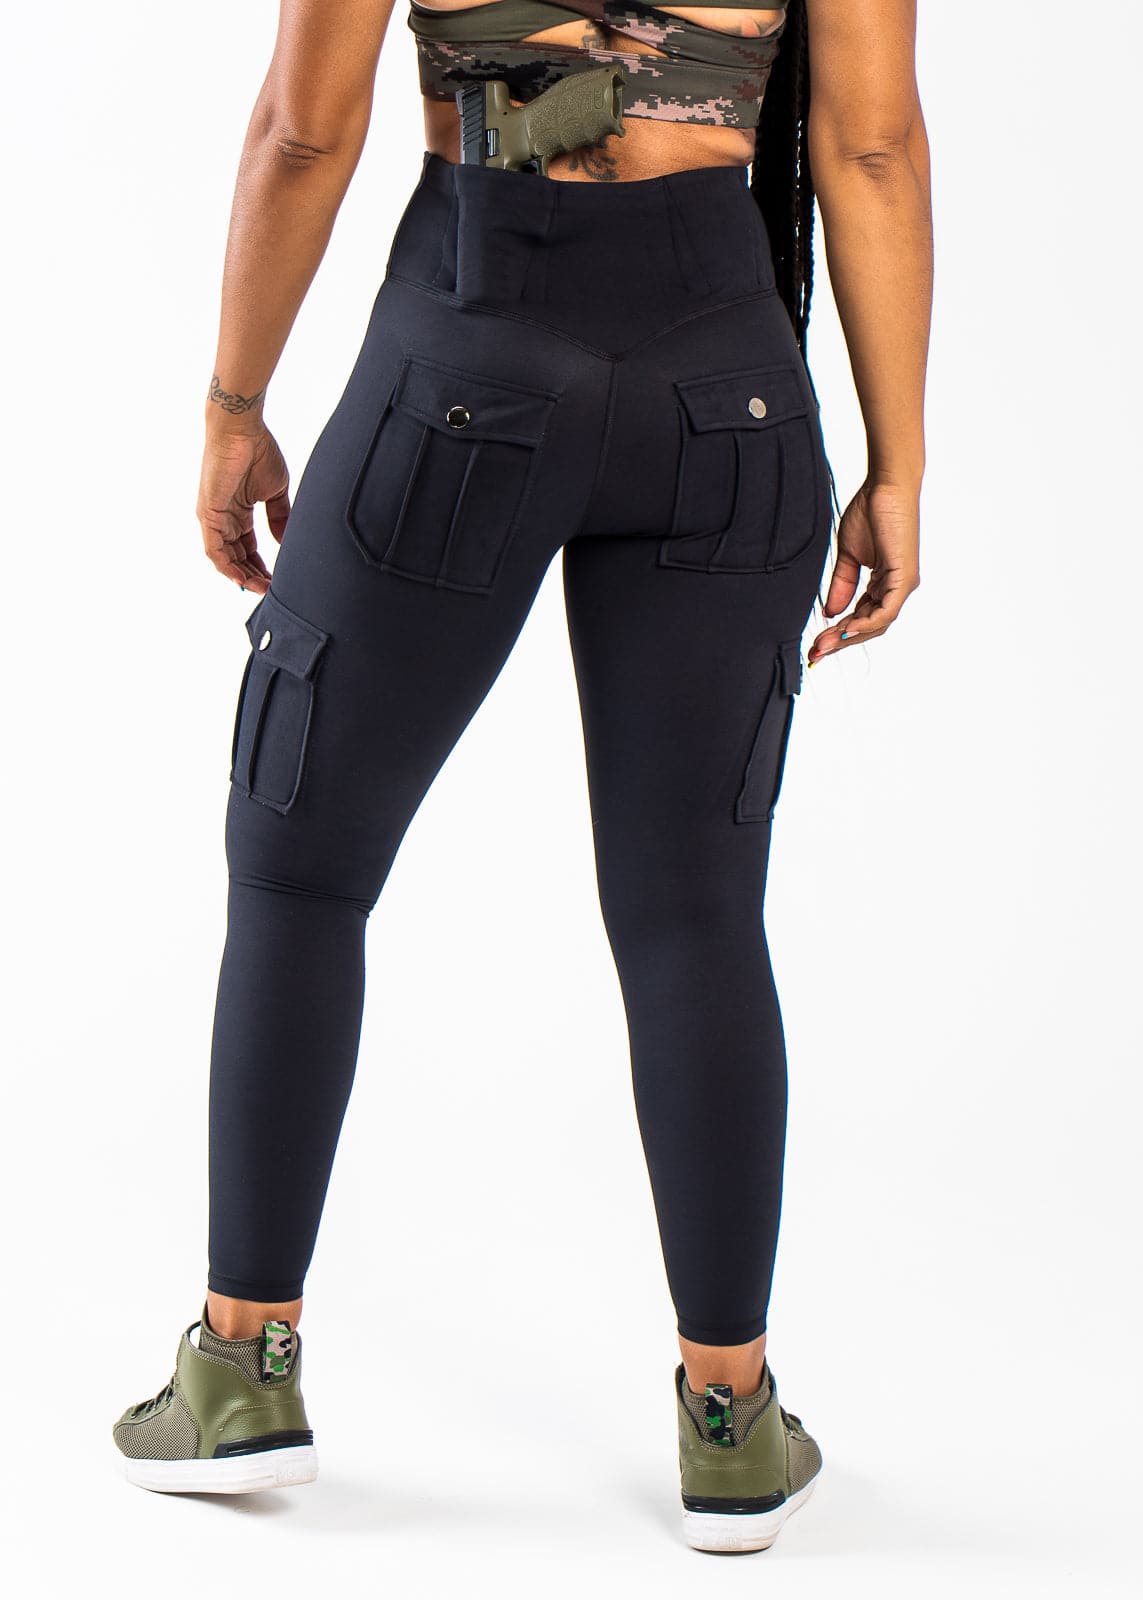 Concealed Carry Leggings With Tactical Pockets Shoulders Down 3/4 Back View Hands at Side | Black